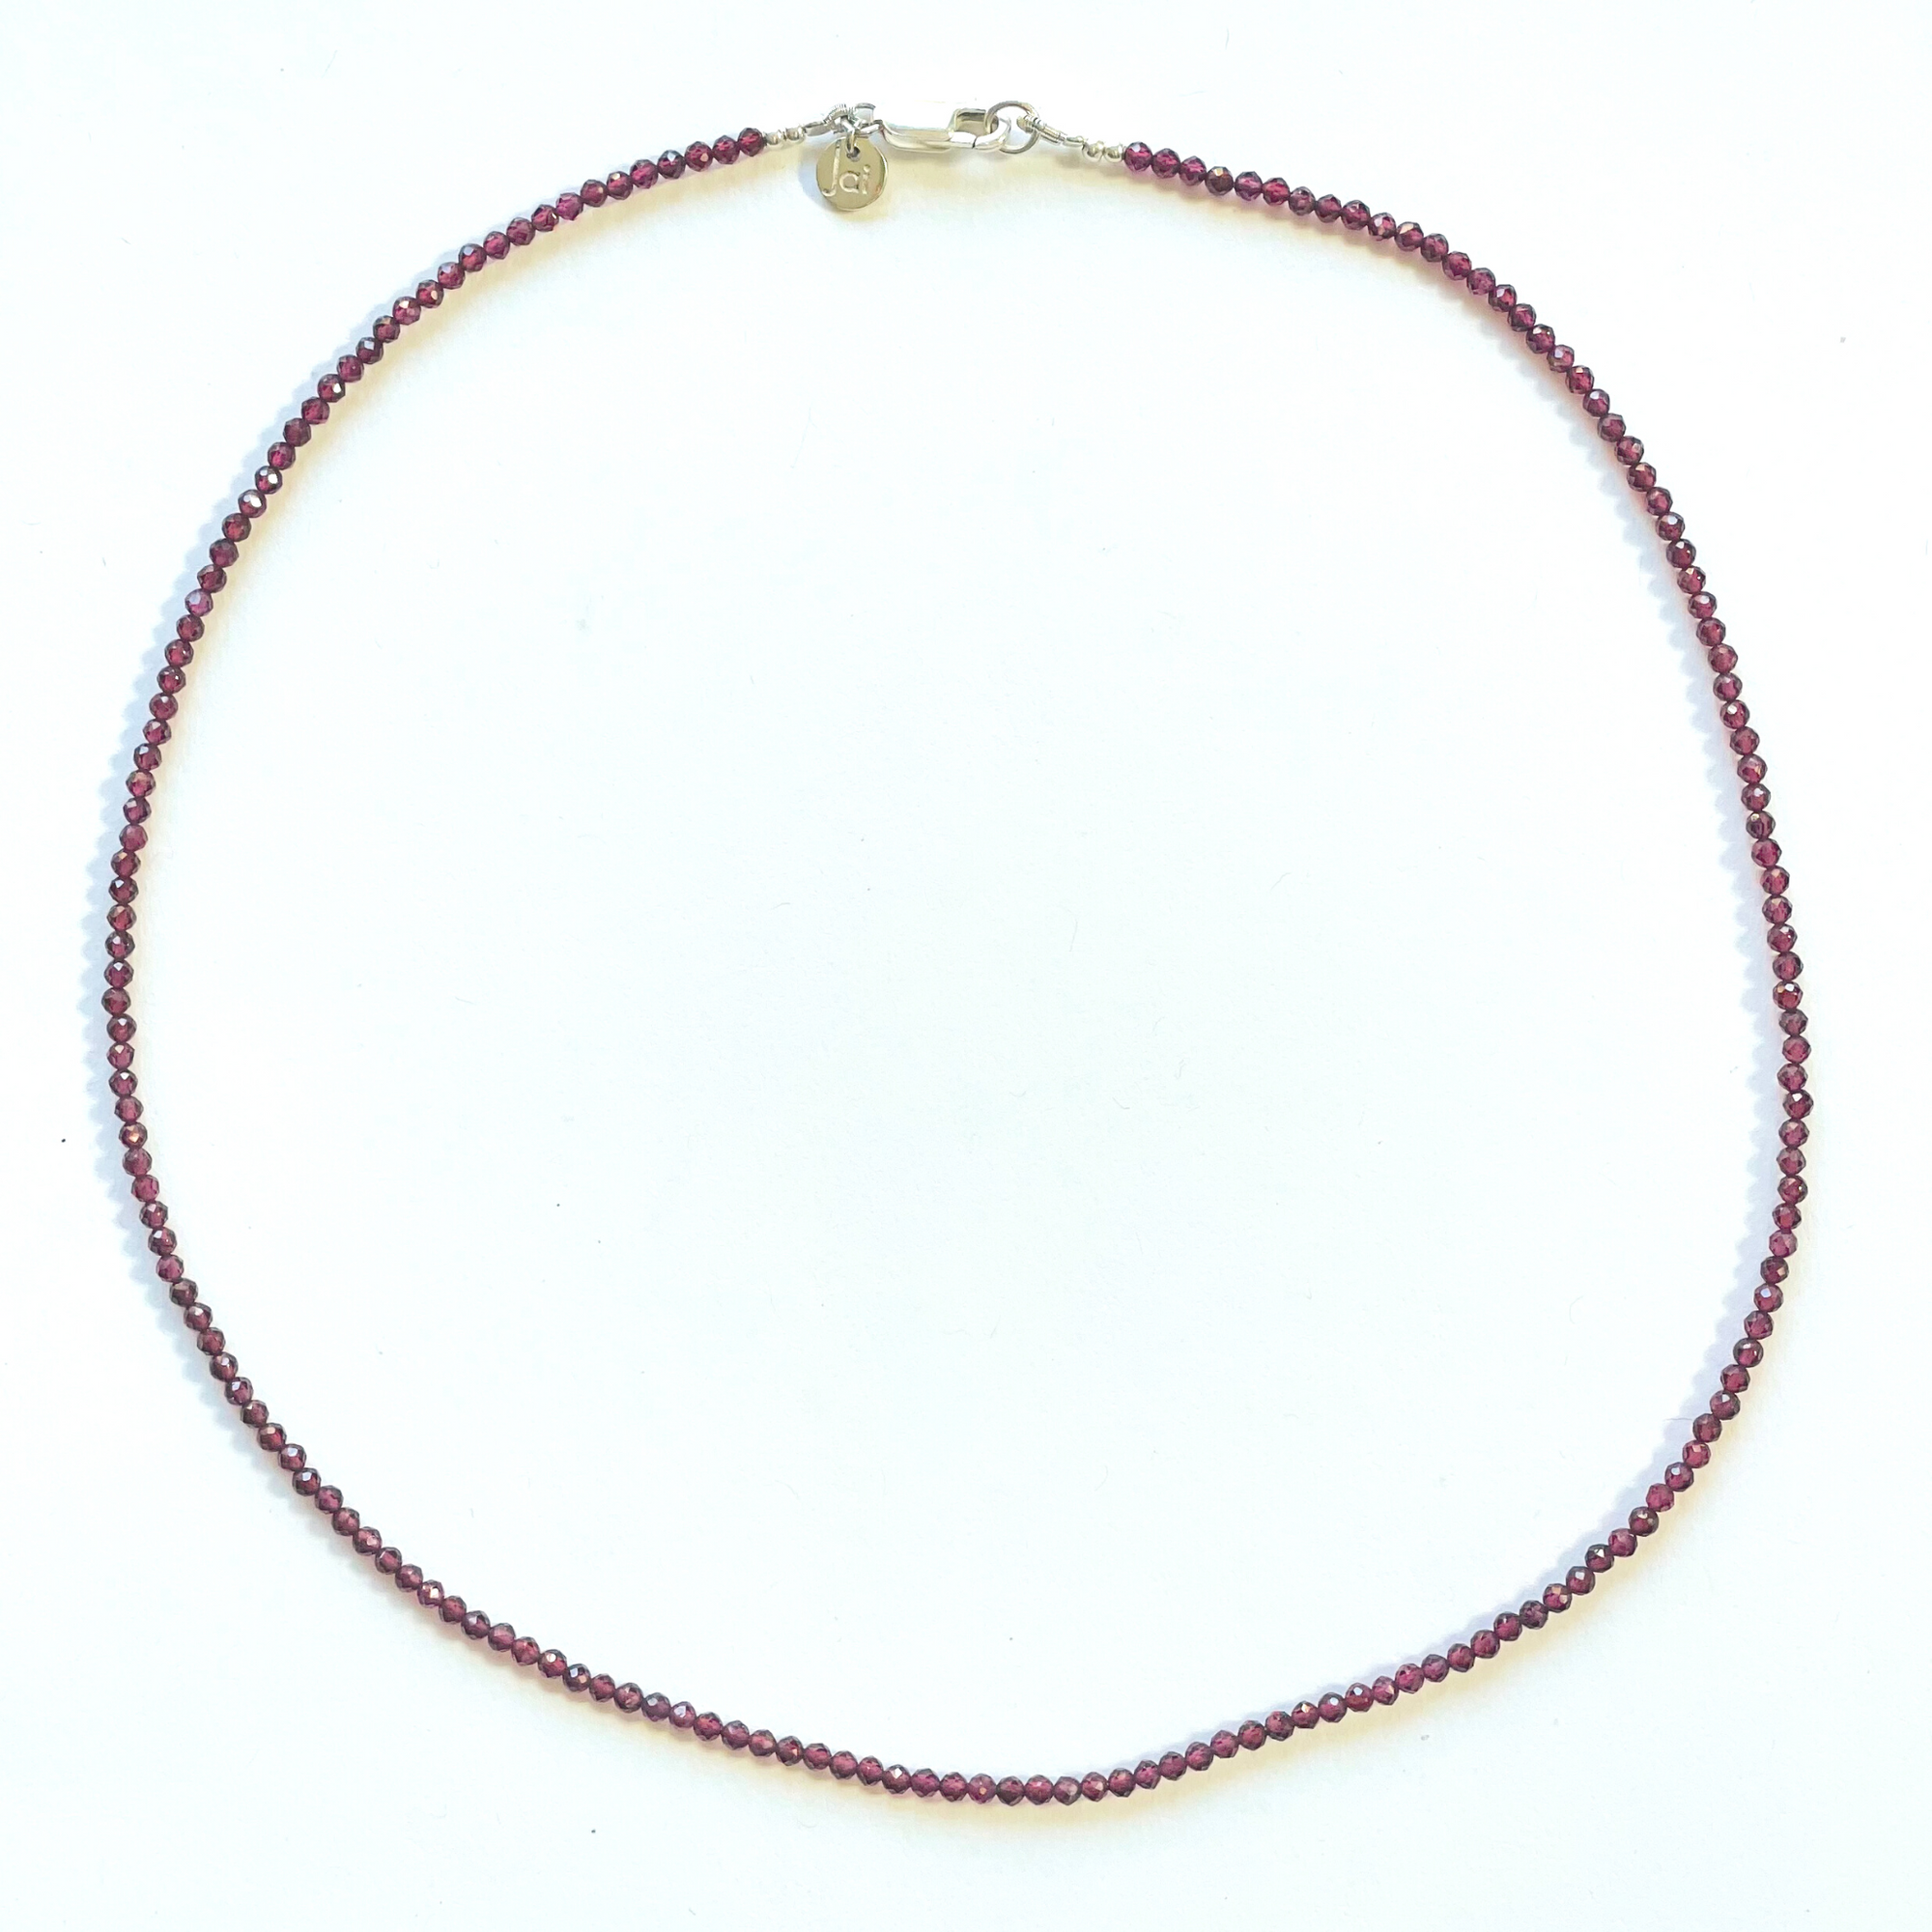 Beautiful, handcrafted 2mm round faceted Garnet semi-precious stone necklace; elegant on its own or with a pendant/charm, and perfect for layering; adorned with .925 sterling silver Jai Style hand-embossed charm and lobster clasp; necklace measures 16".